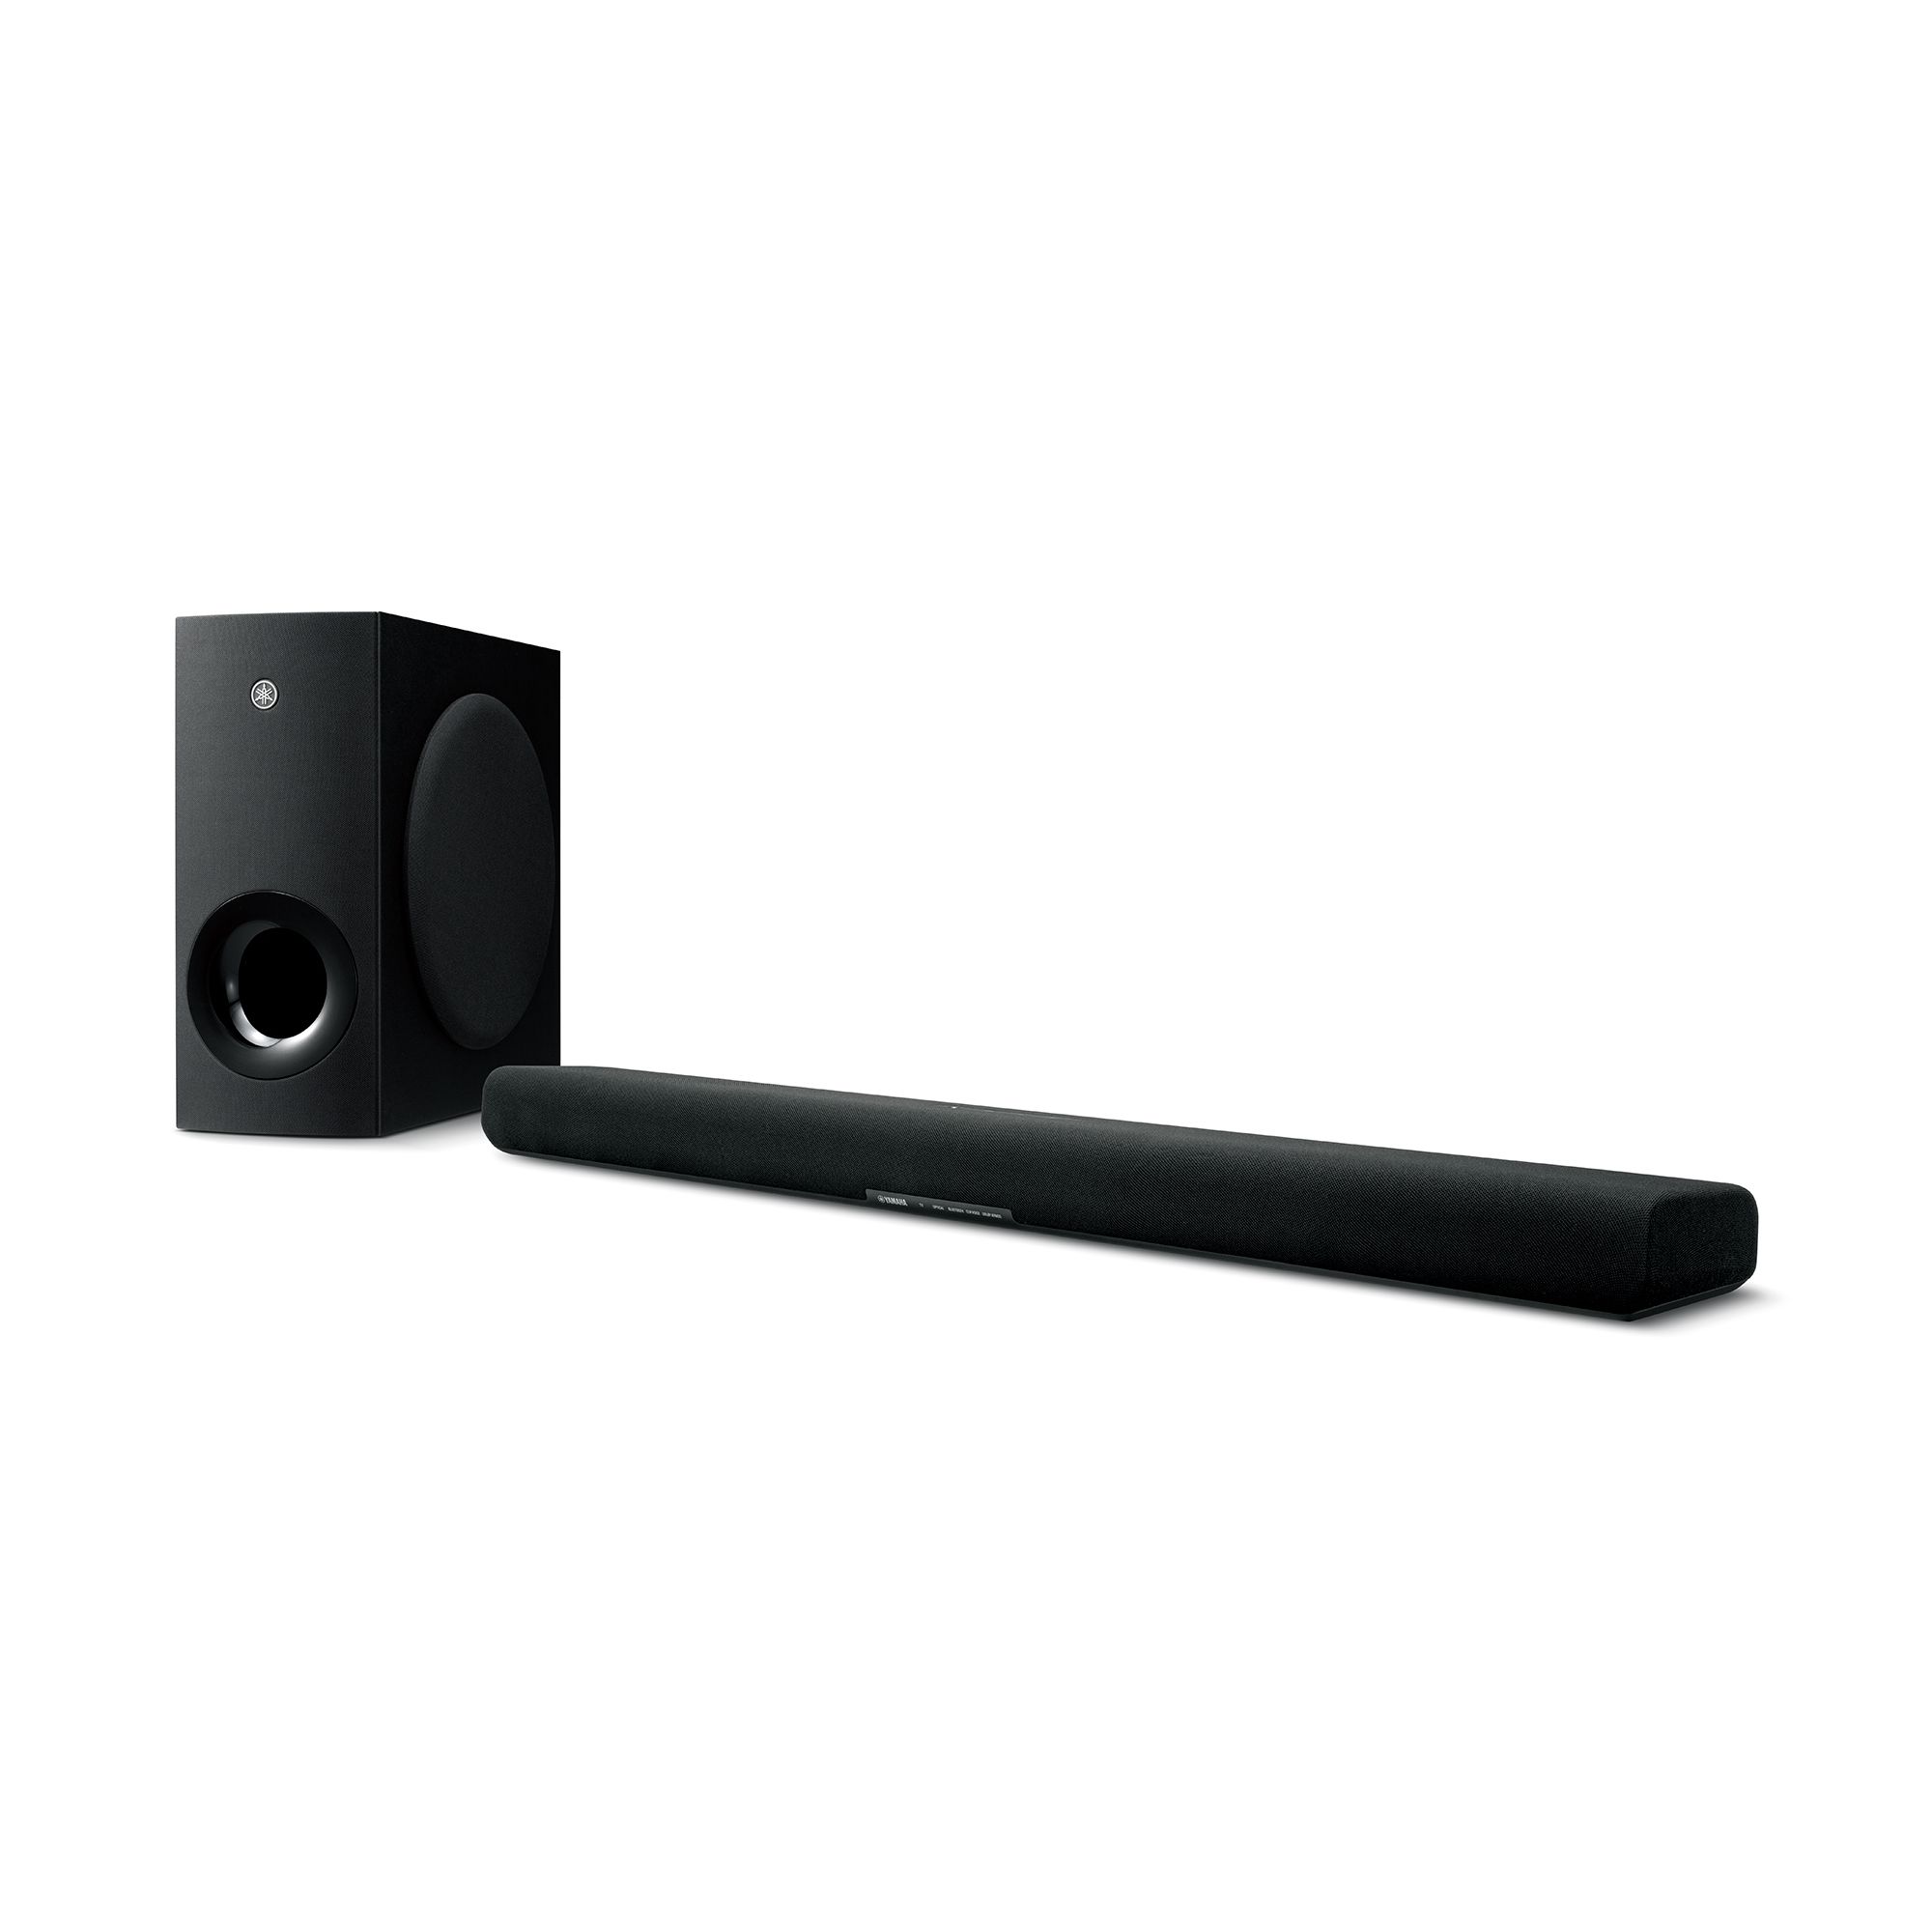 SR-B20A - Overview - Sound Bar - Audio & Visual - Products 